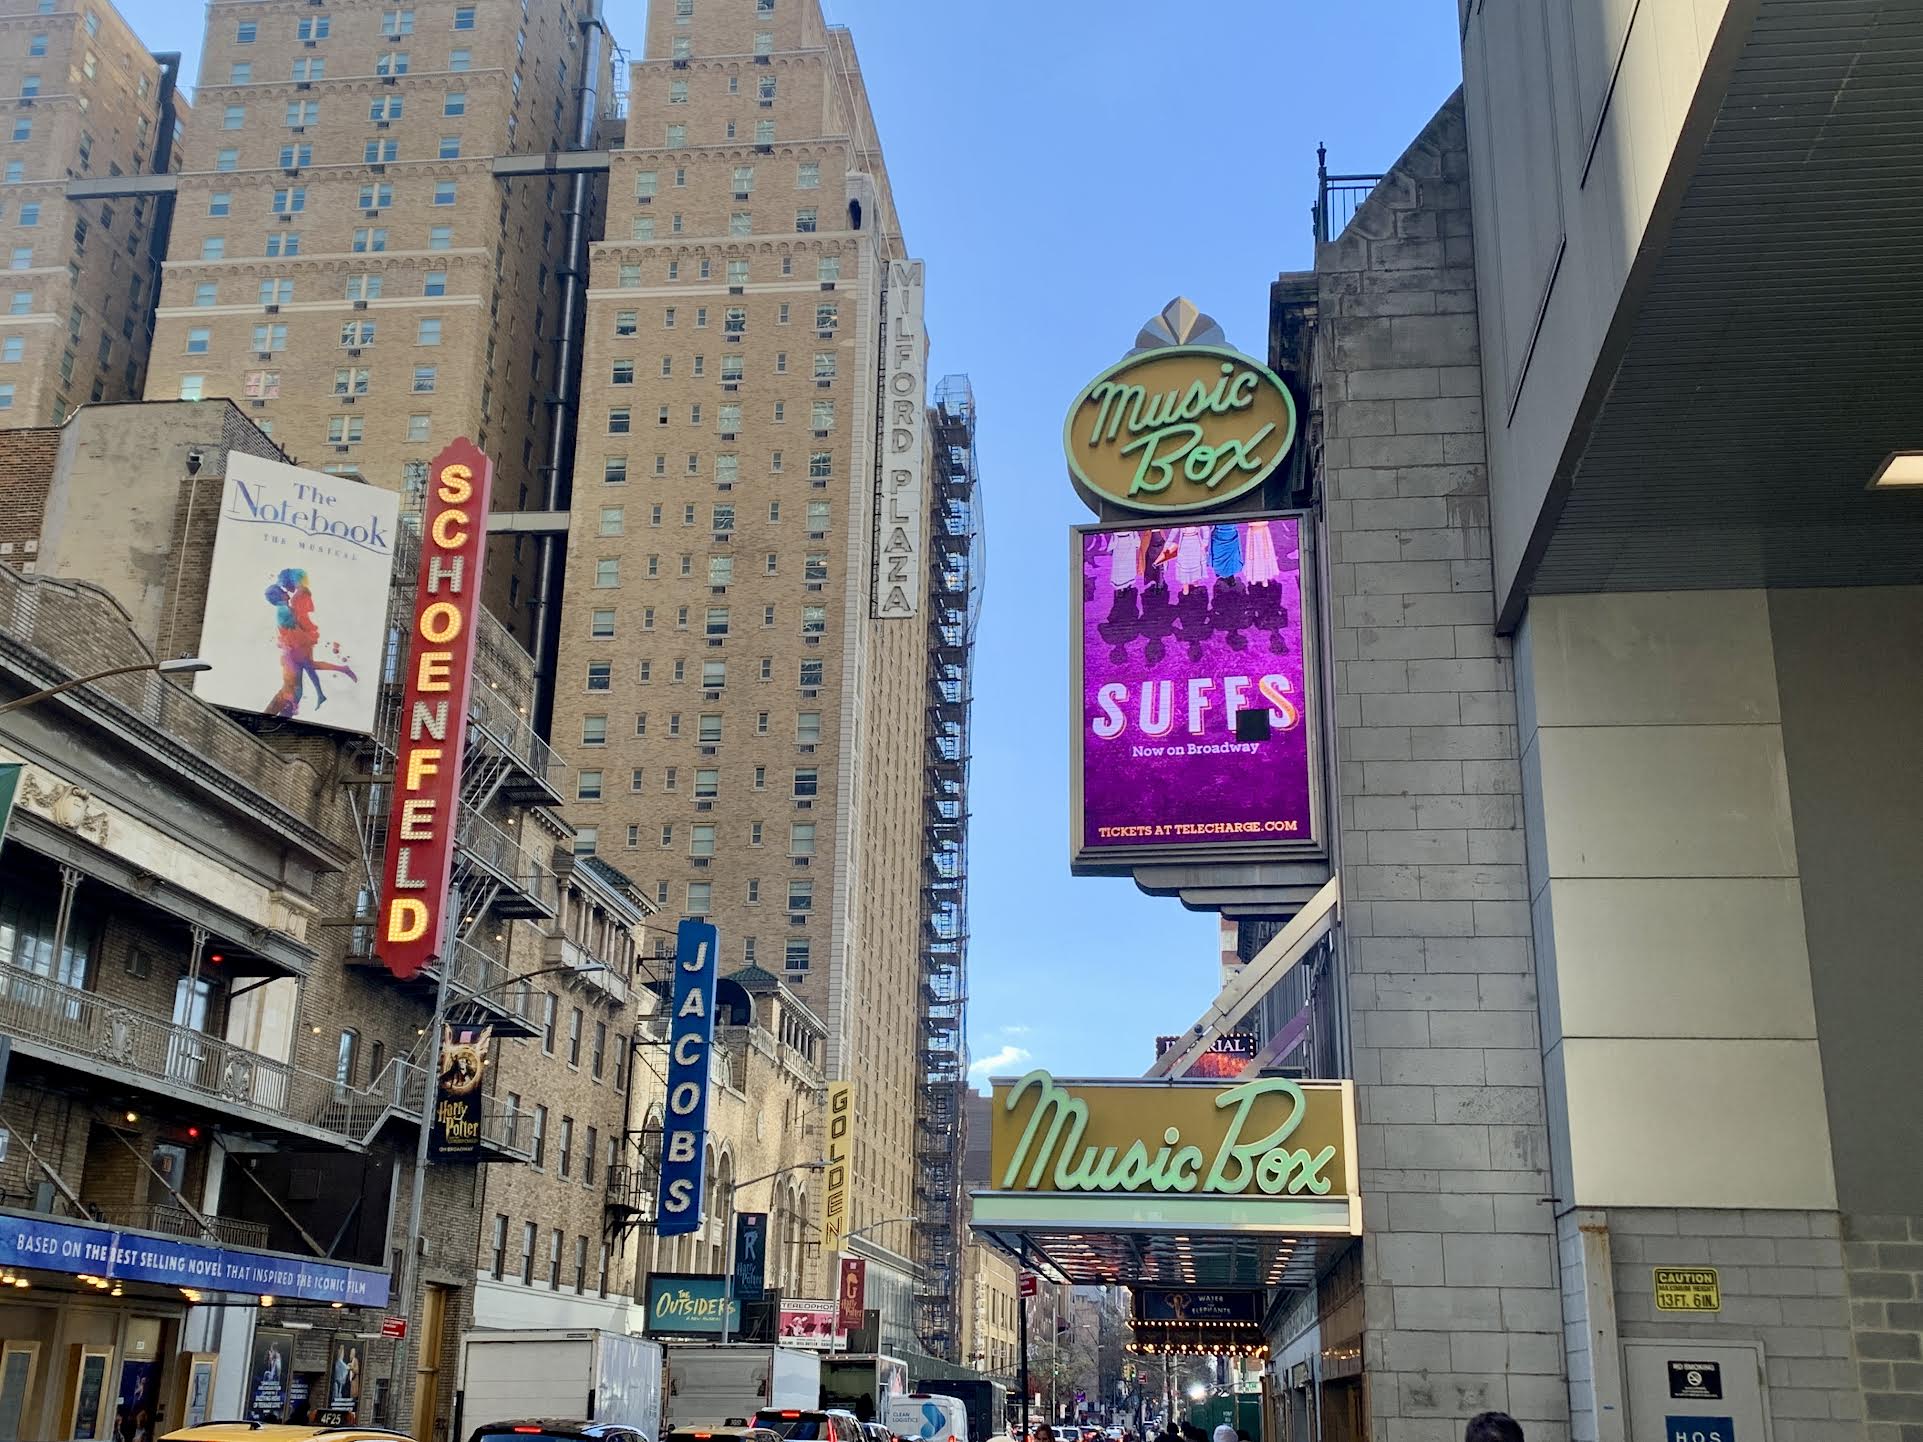 The Manhattan theater where "Suffs" is playing is shown. (Credit: Marine Saint)